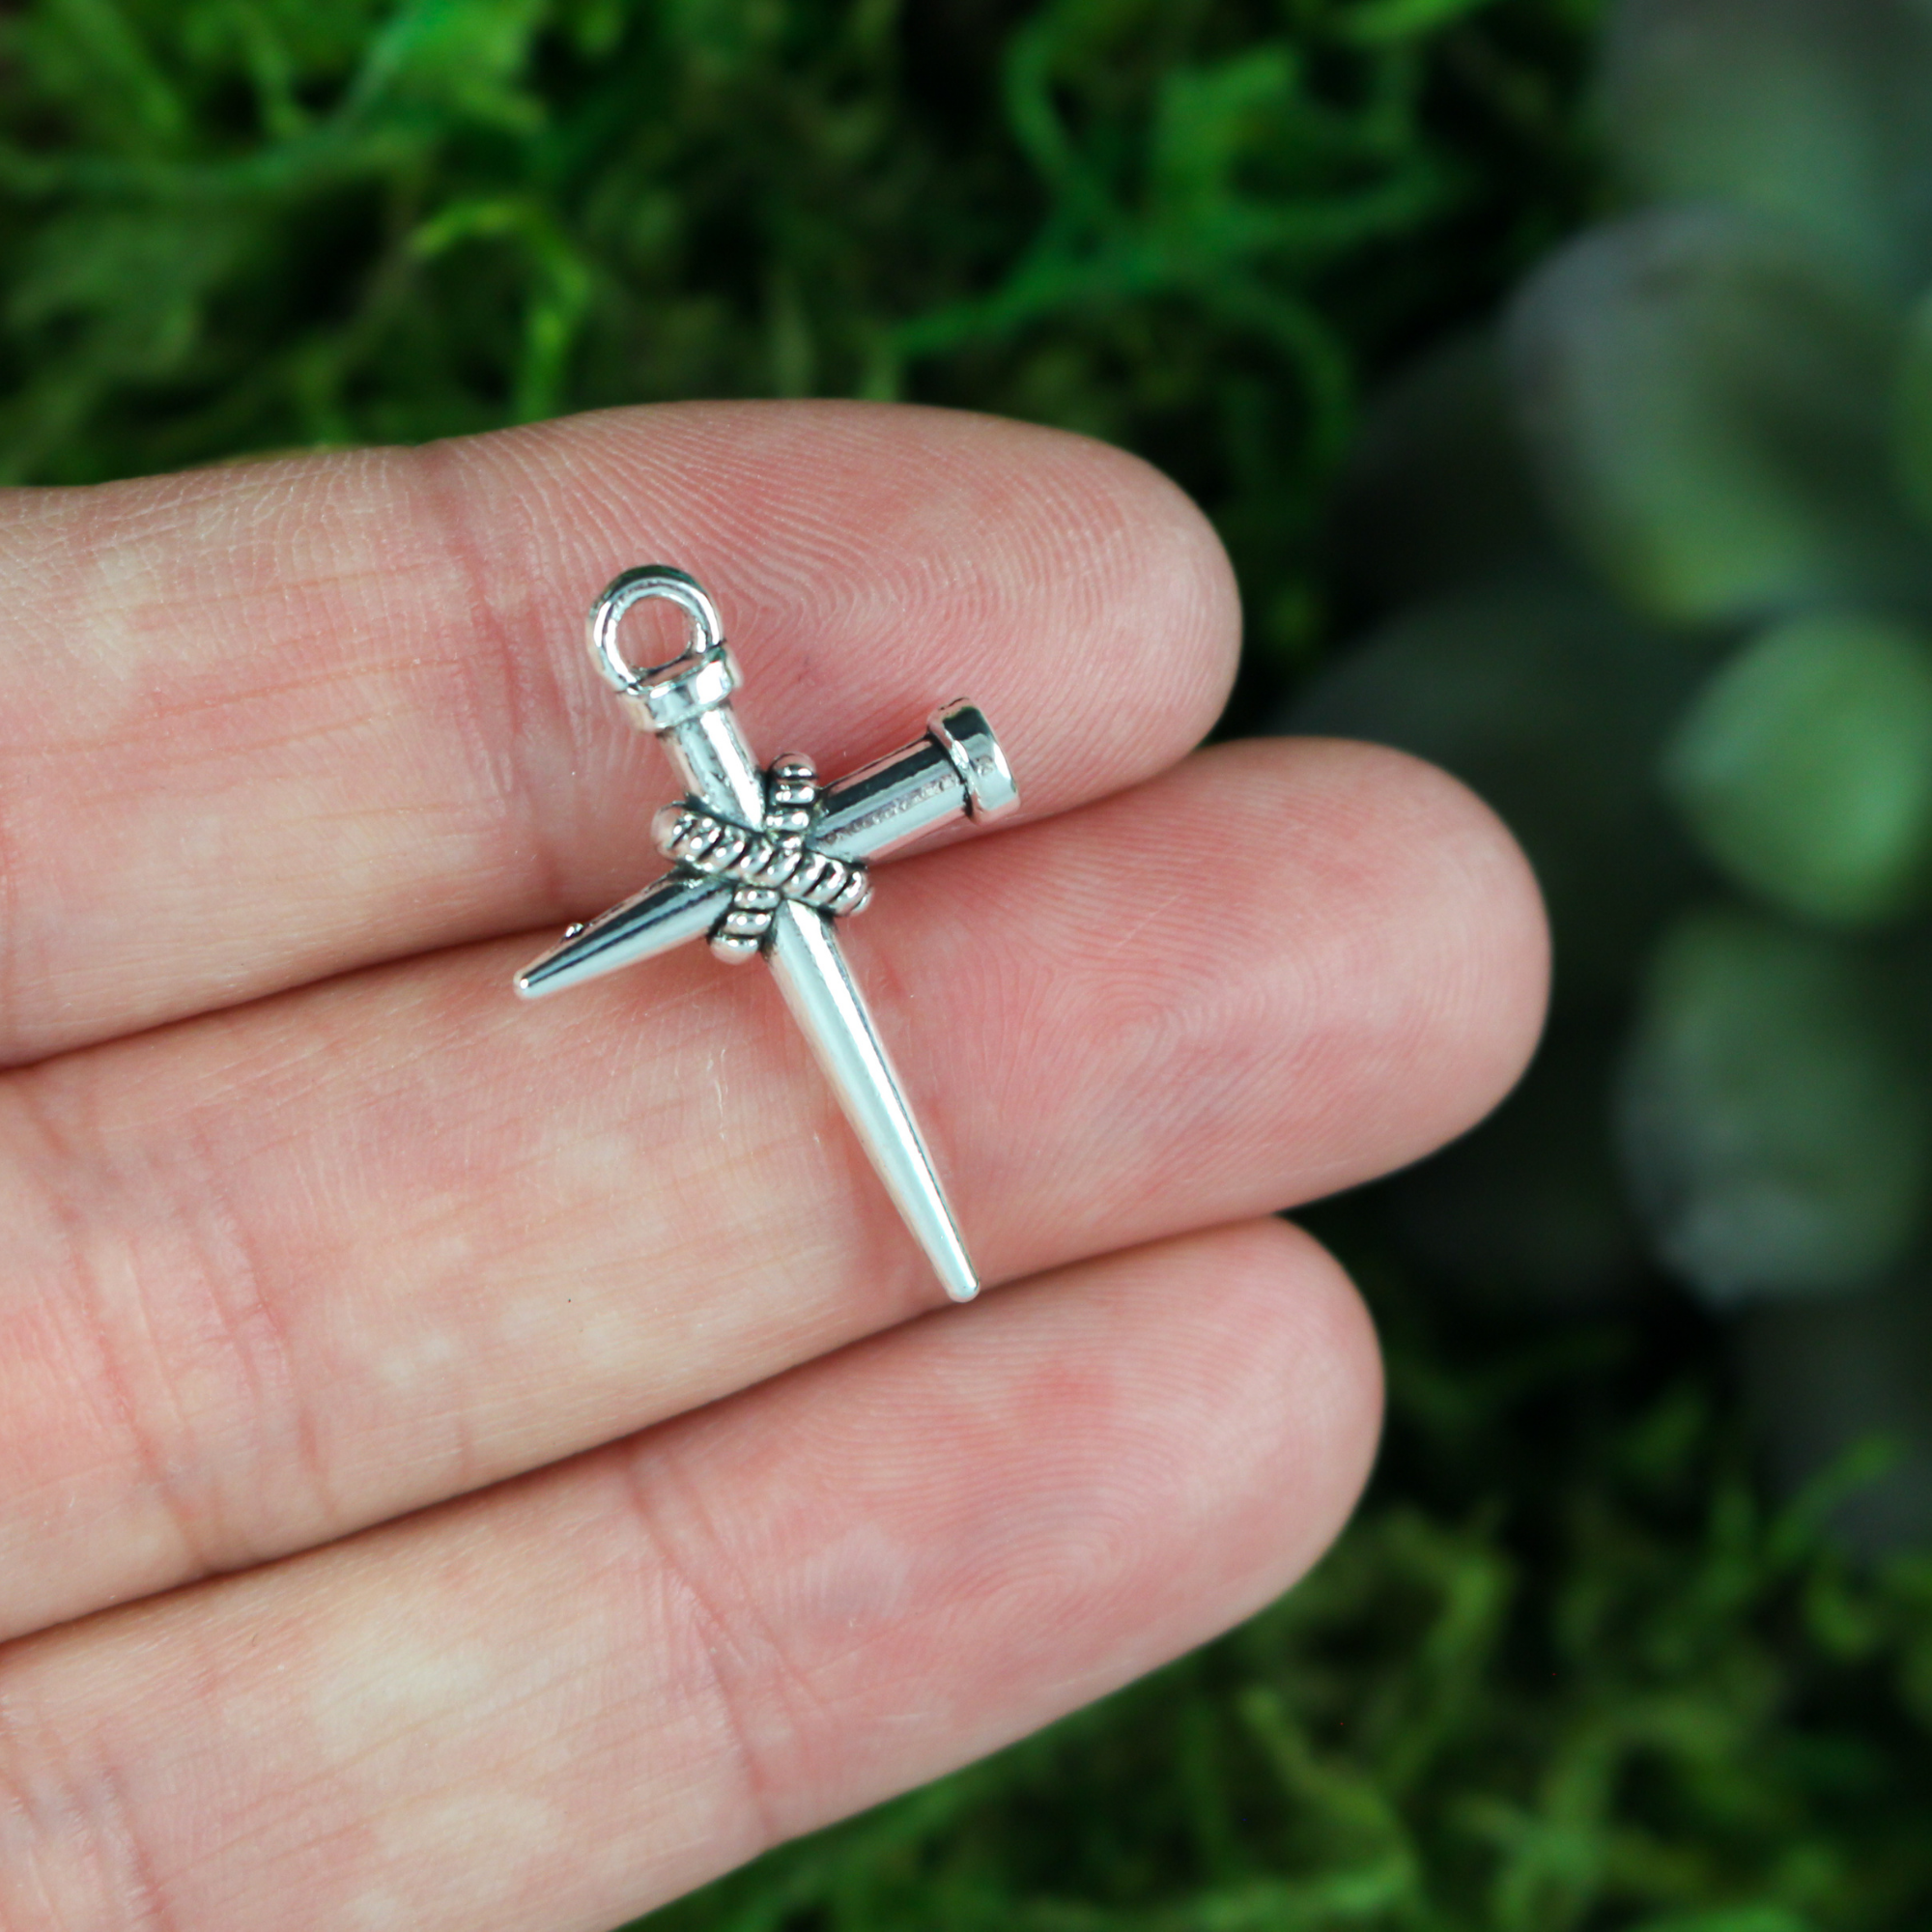 Silver-tone cross charm of two nails bound together to symbolize peace and reconciliation